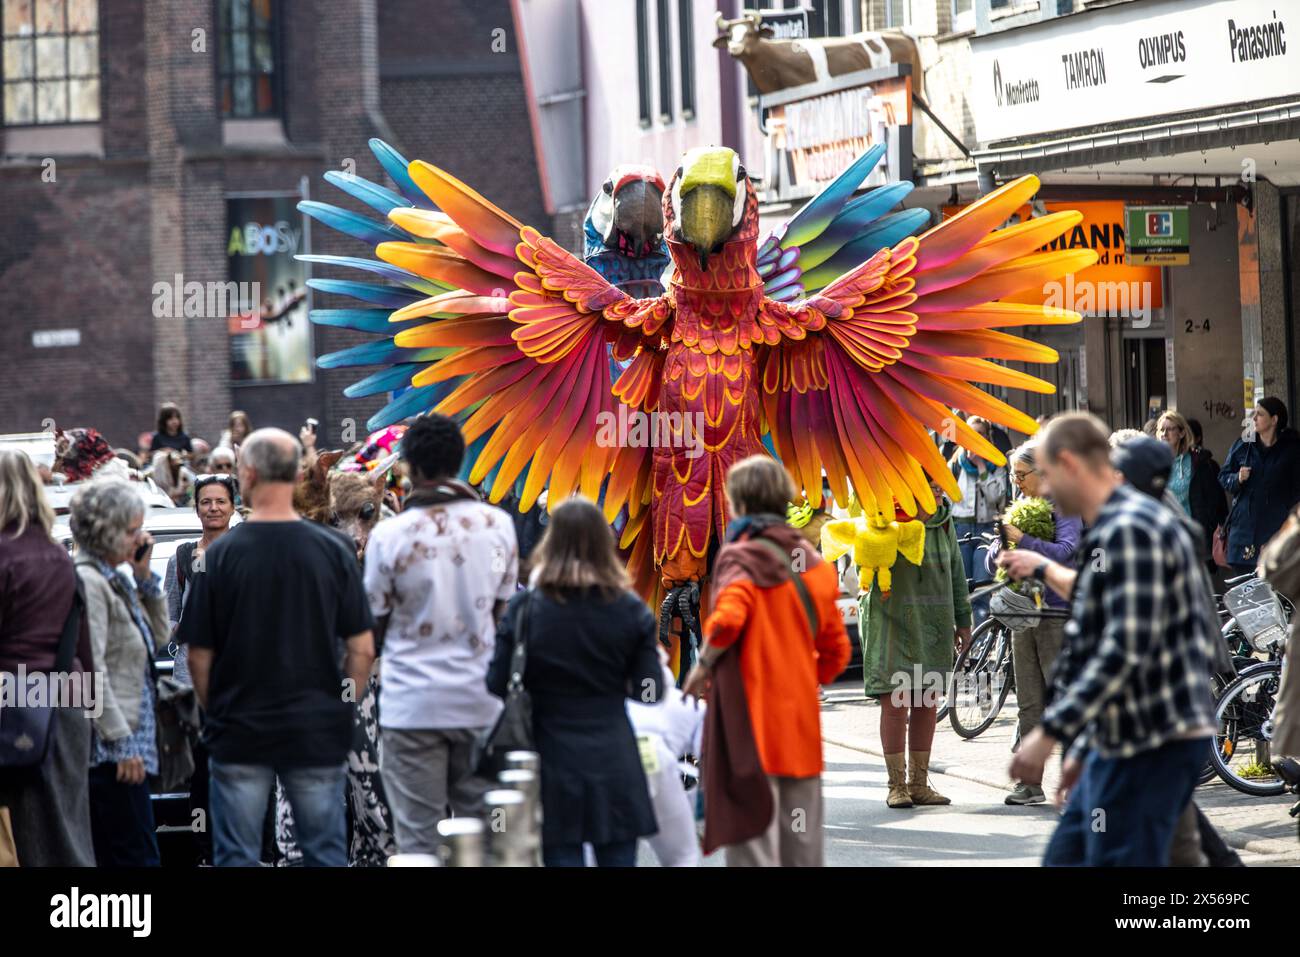 Bochum, Germany. 07th May, 2024. Two parrot statues stand in the street at the opening of the Fidena puppet theater festival. The puppet theater festival opened with a parade of oversized insects and strange creatures. International puppet theater makers will present contemporary puppetry in Bochum, Herne, Recklinghausen and Dortmund. The parade aims to make a statement against the extinction of species. The festival offers 22 productions from ten countries, including three world premieres and five German premieres. Credit: Dieter Menne/dpa/Alamy Live News Stock Photo